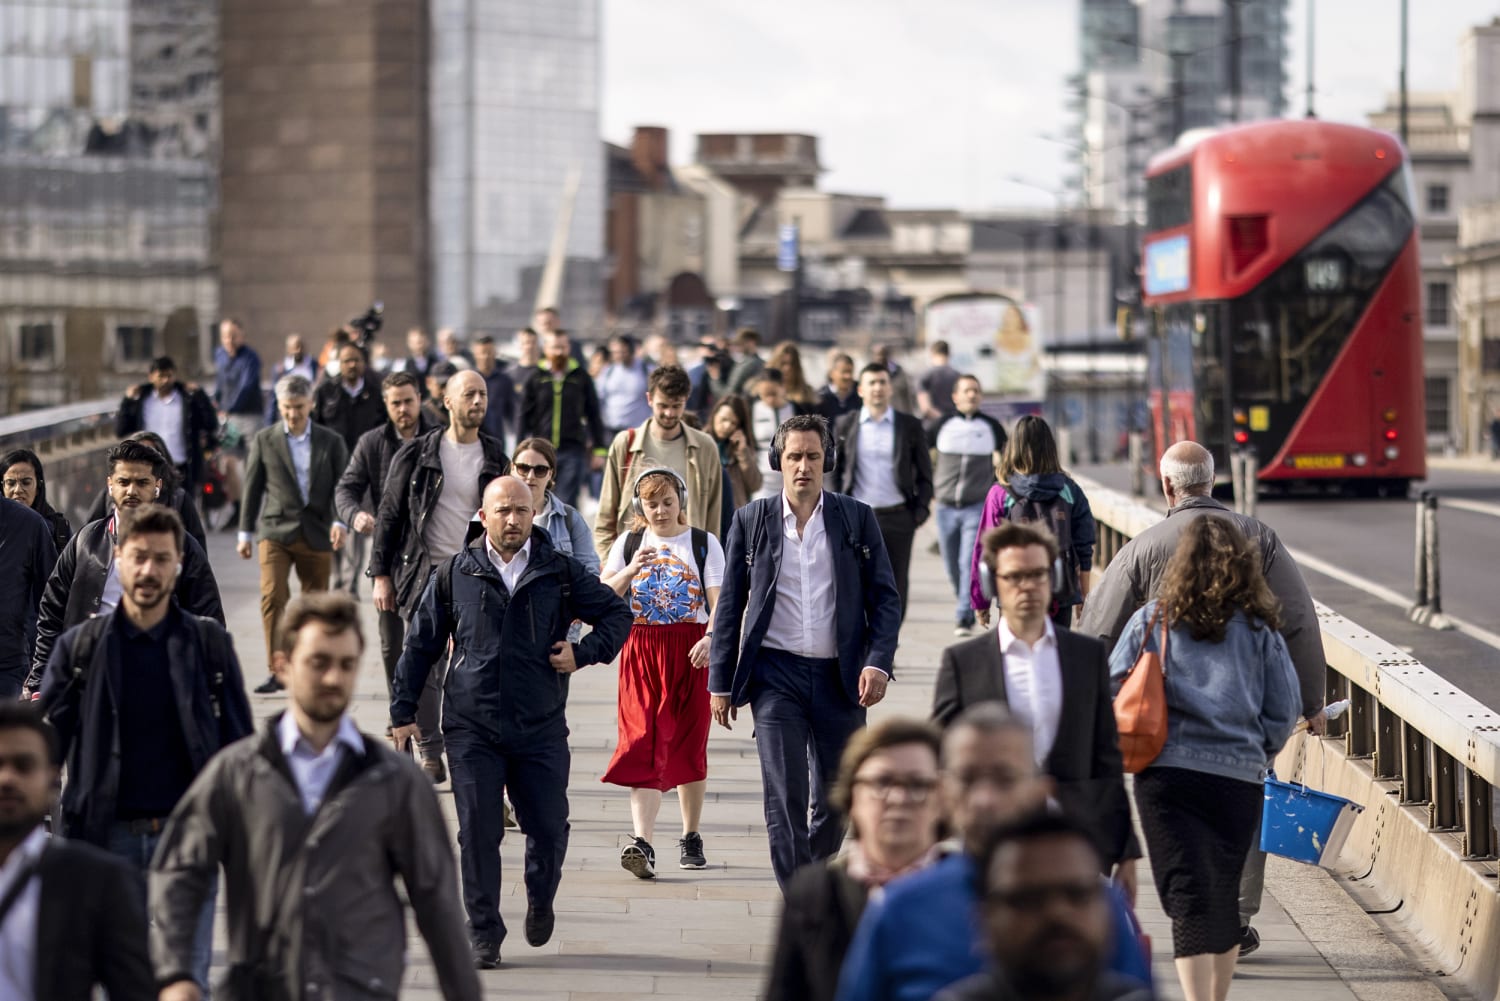 A four-day workweek test is on in Britain, part of effort to boost employee well-being and business success.